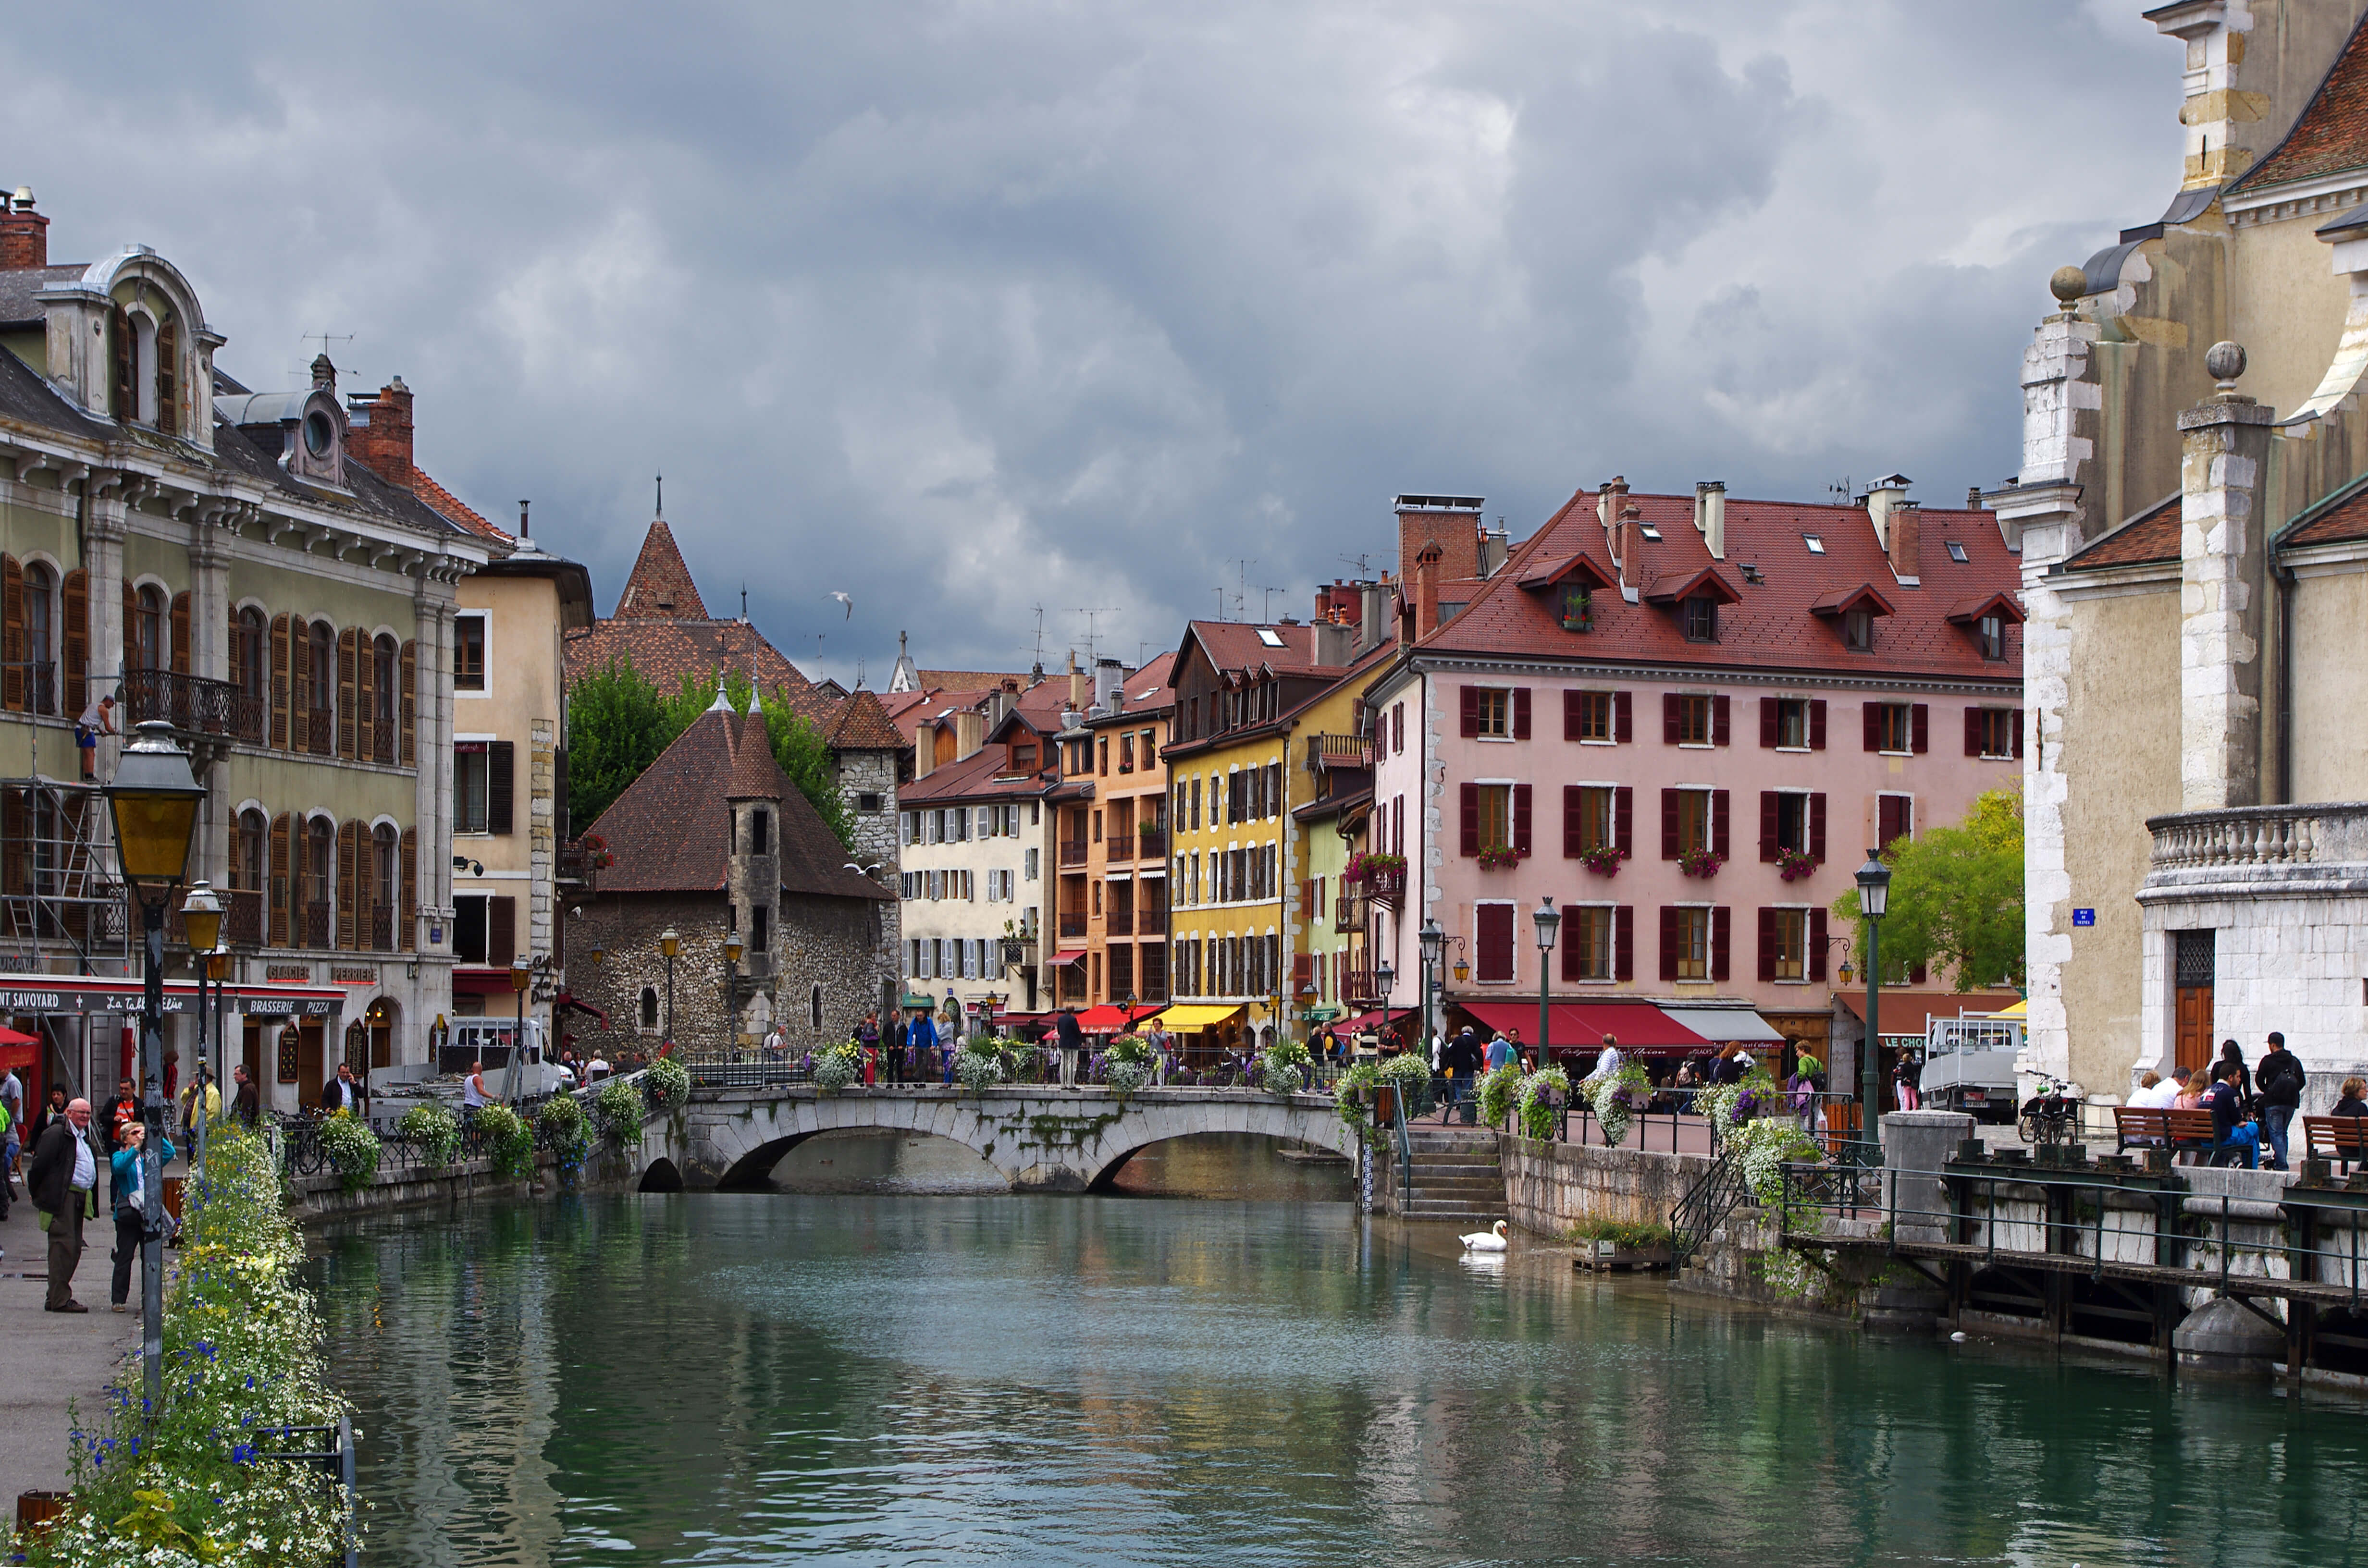 A real-life fairytale in Annecy, France | Traveling Europe